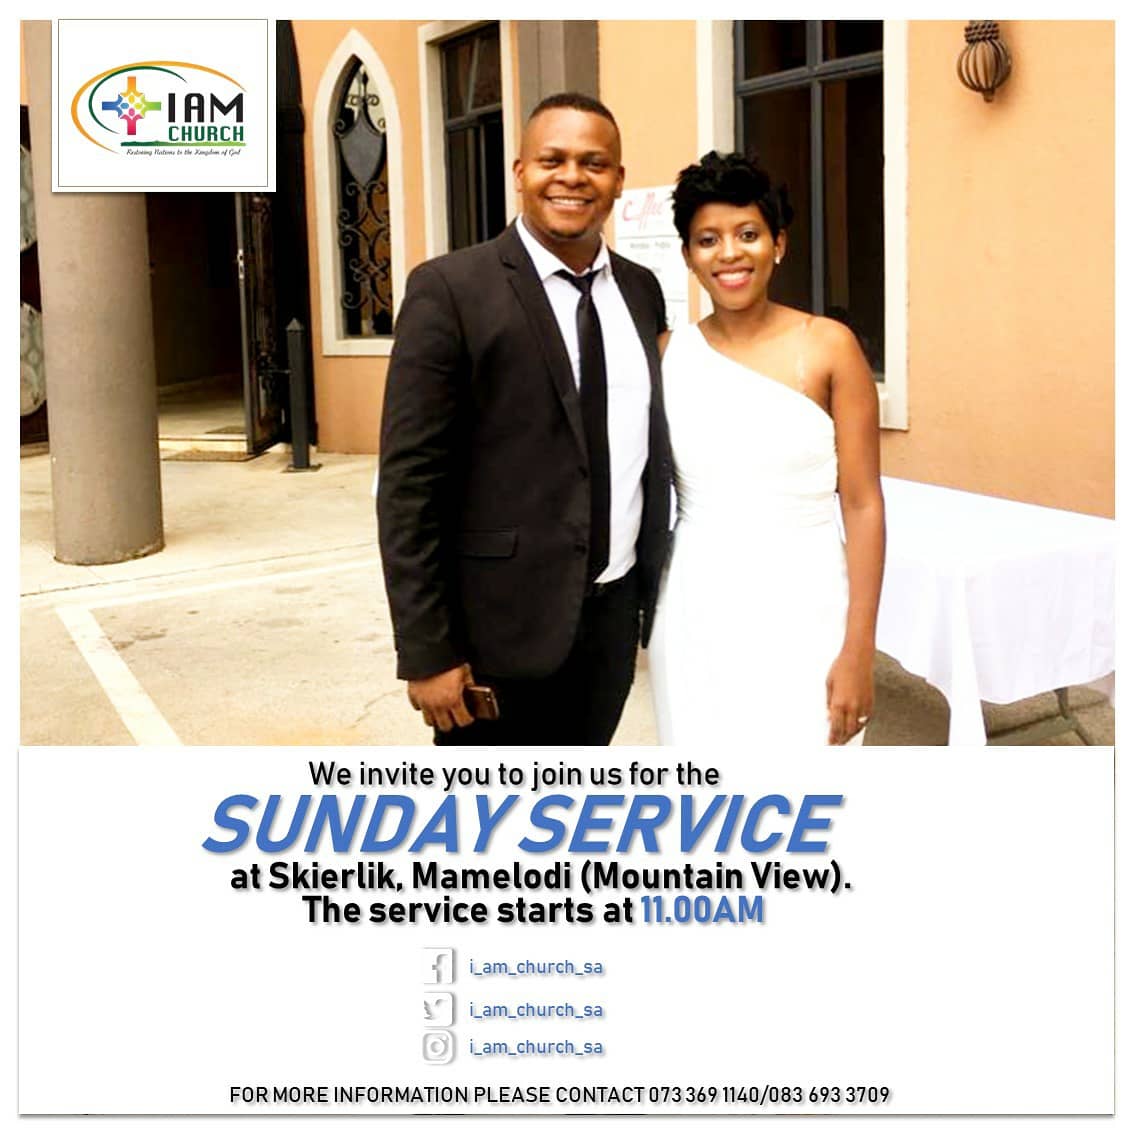 Join us tomorrow for our #SundayServices ..

(1) 8am, in Hatfield, TheLink. 
(2) 11am, in Mamelodi, Skierlik. 

#IAMChurch